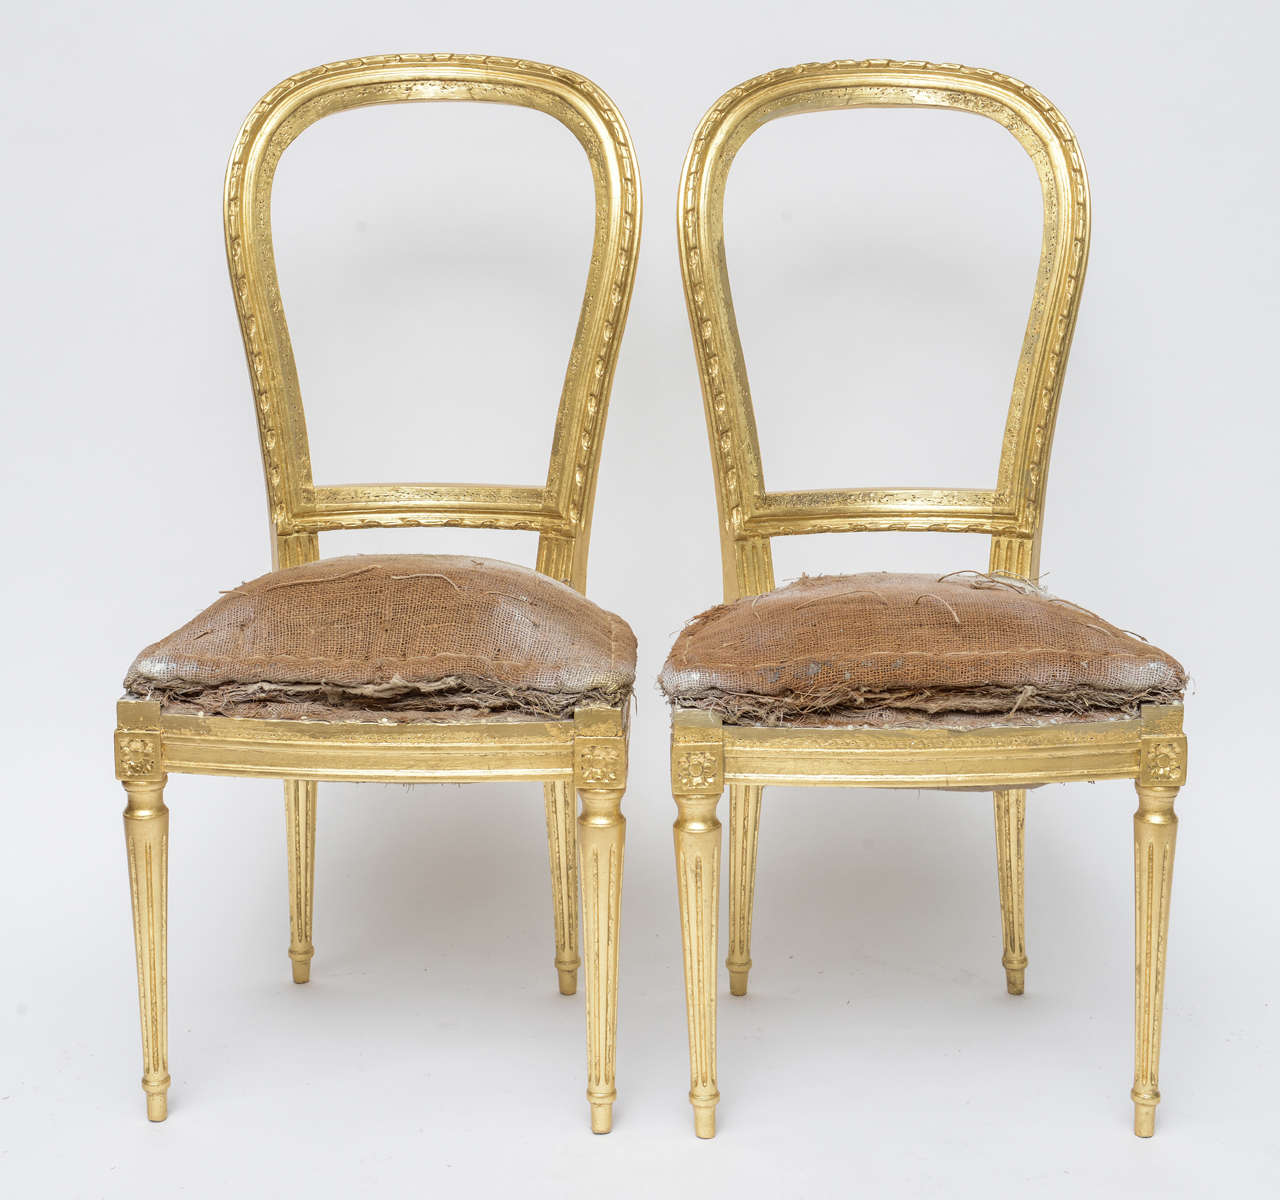 Lovely Pair of Antique Chairs that are Newly Gilded and with the Original Jute Padding. These Chairs can be Refinished by us with any fabric of your Choice or be left alone as an Object d'Art.